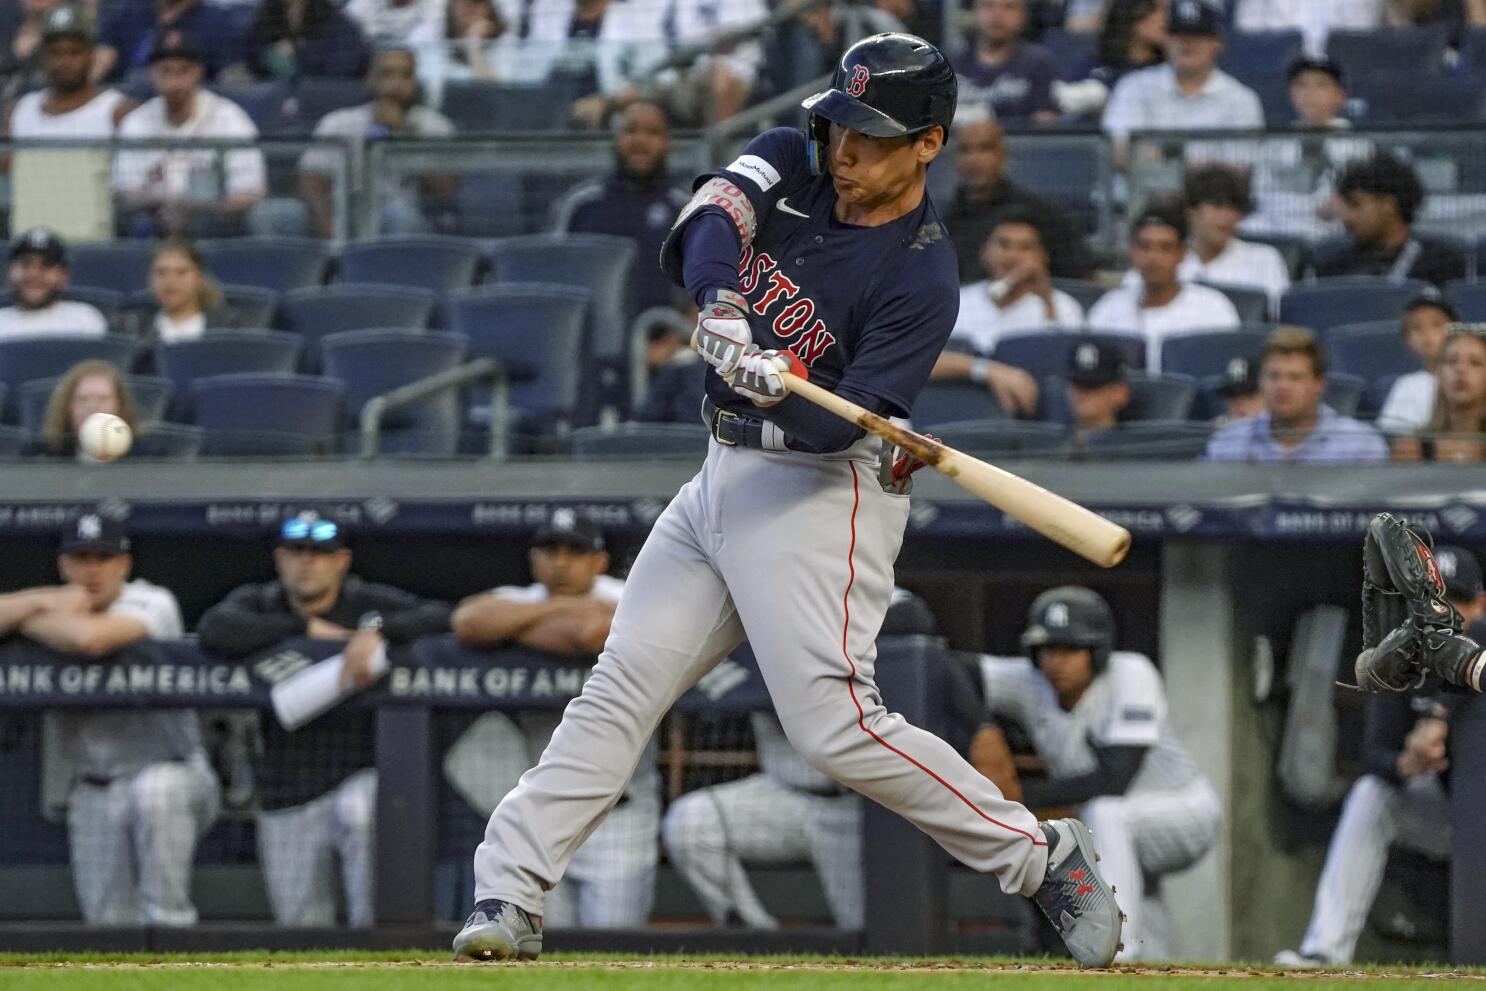 Cole, Stanton lead Yankees past Red Sox 8-3